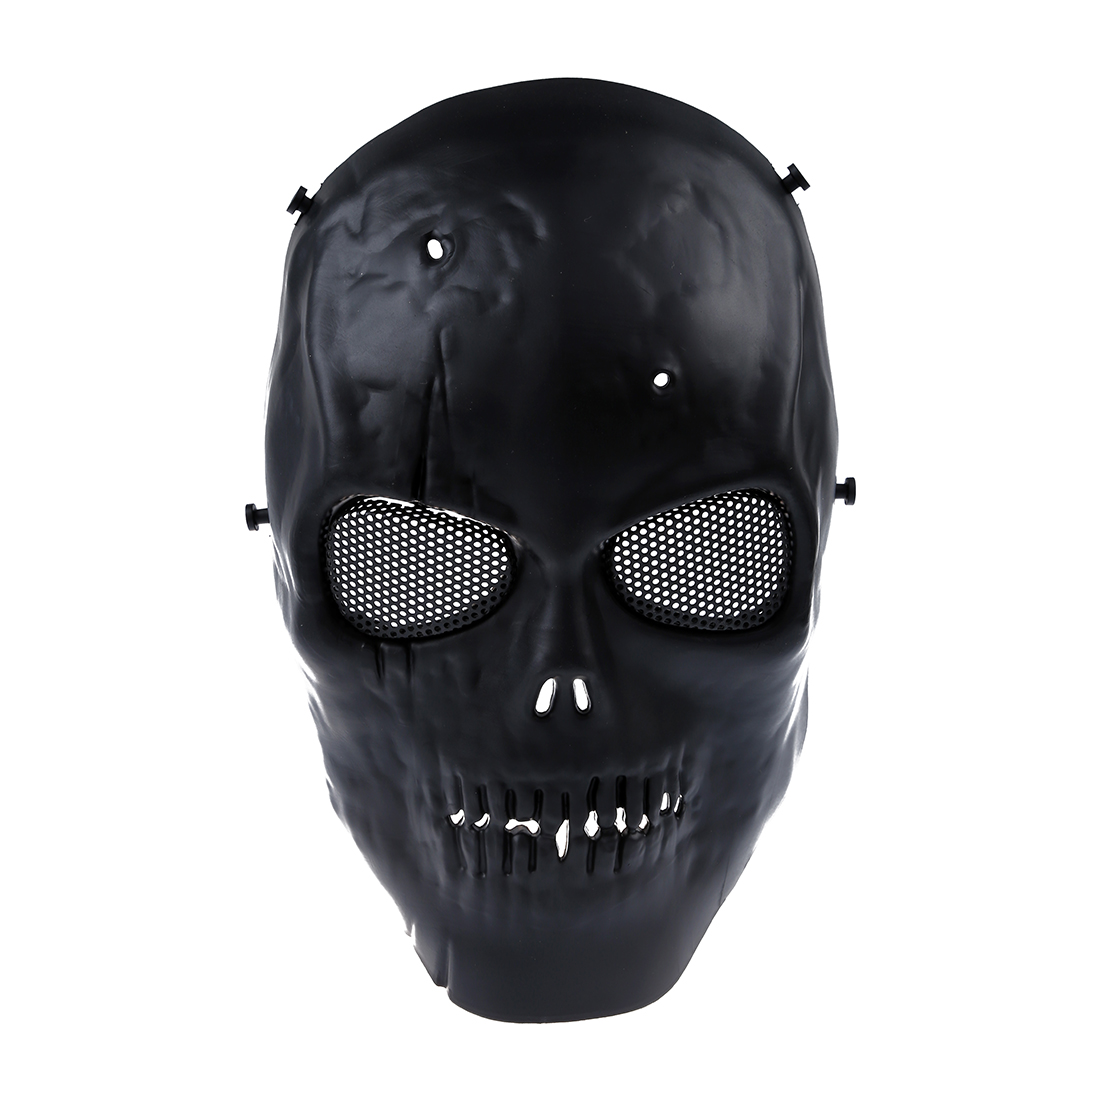 CS Games Skull Skeleton Full Face Mask Tactical Paintball Airsoft Protect Mask 